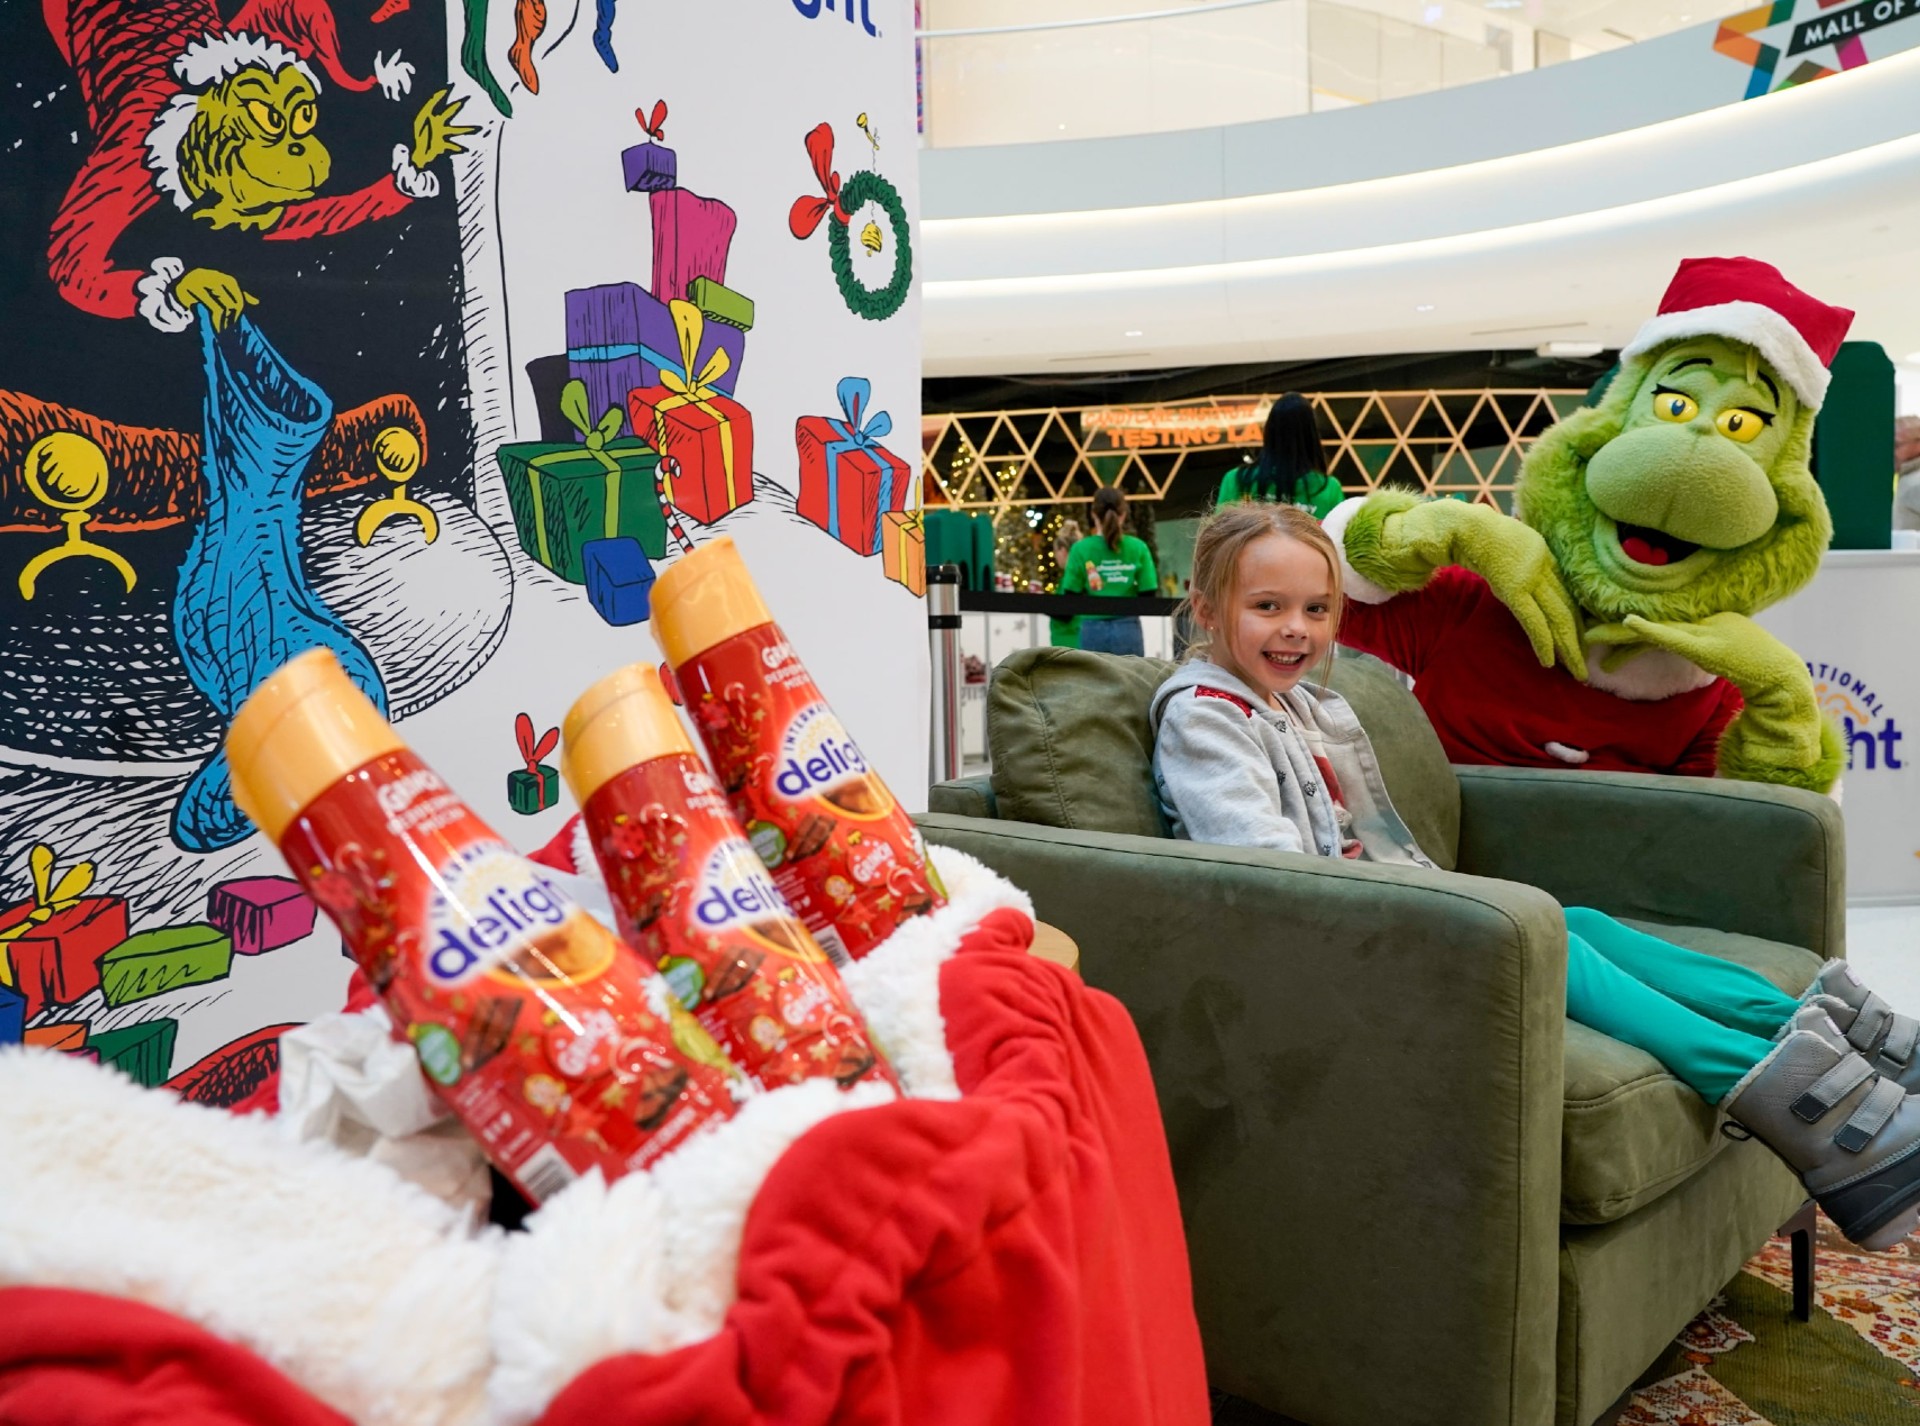 Paisley Blessing, 6, poses with the Grinch, who was at Mall of America on Thursday, Dec. 8, 2022, serving up free coffee with International Delight Grinch Peppermint Mocha creamer.